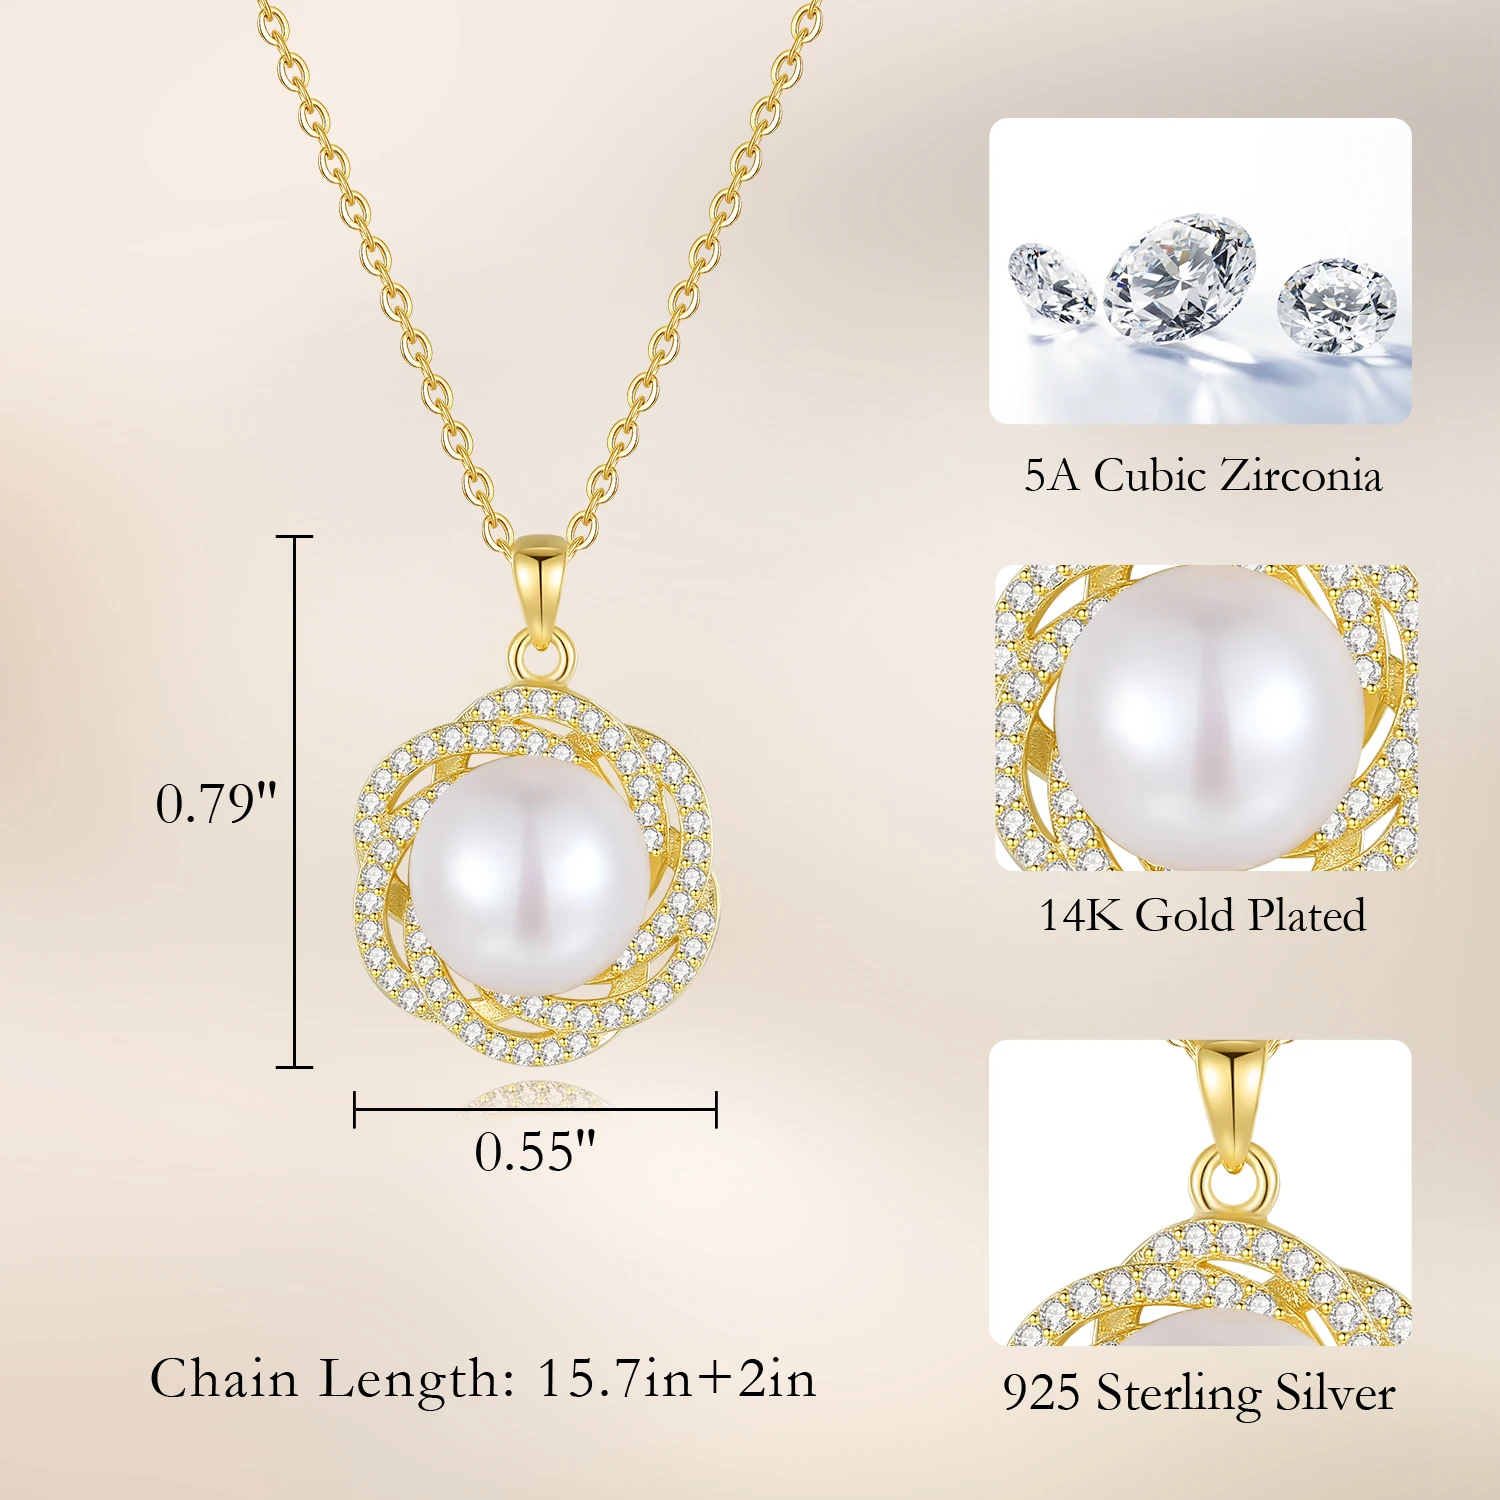 CDE PRYN002 Jewelry Necklace Fine 925 Sterling Silver 14K Gold Plated Necklace Wholesale Women Pearl Flower Pendant Necklace